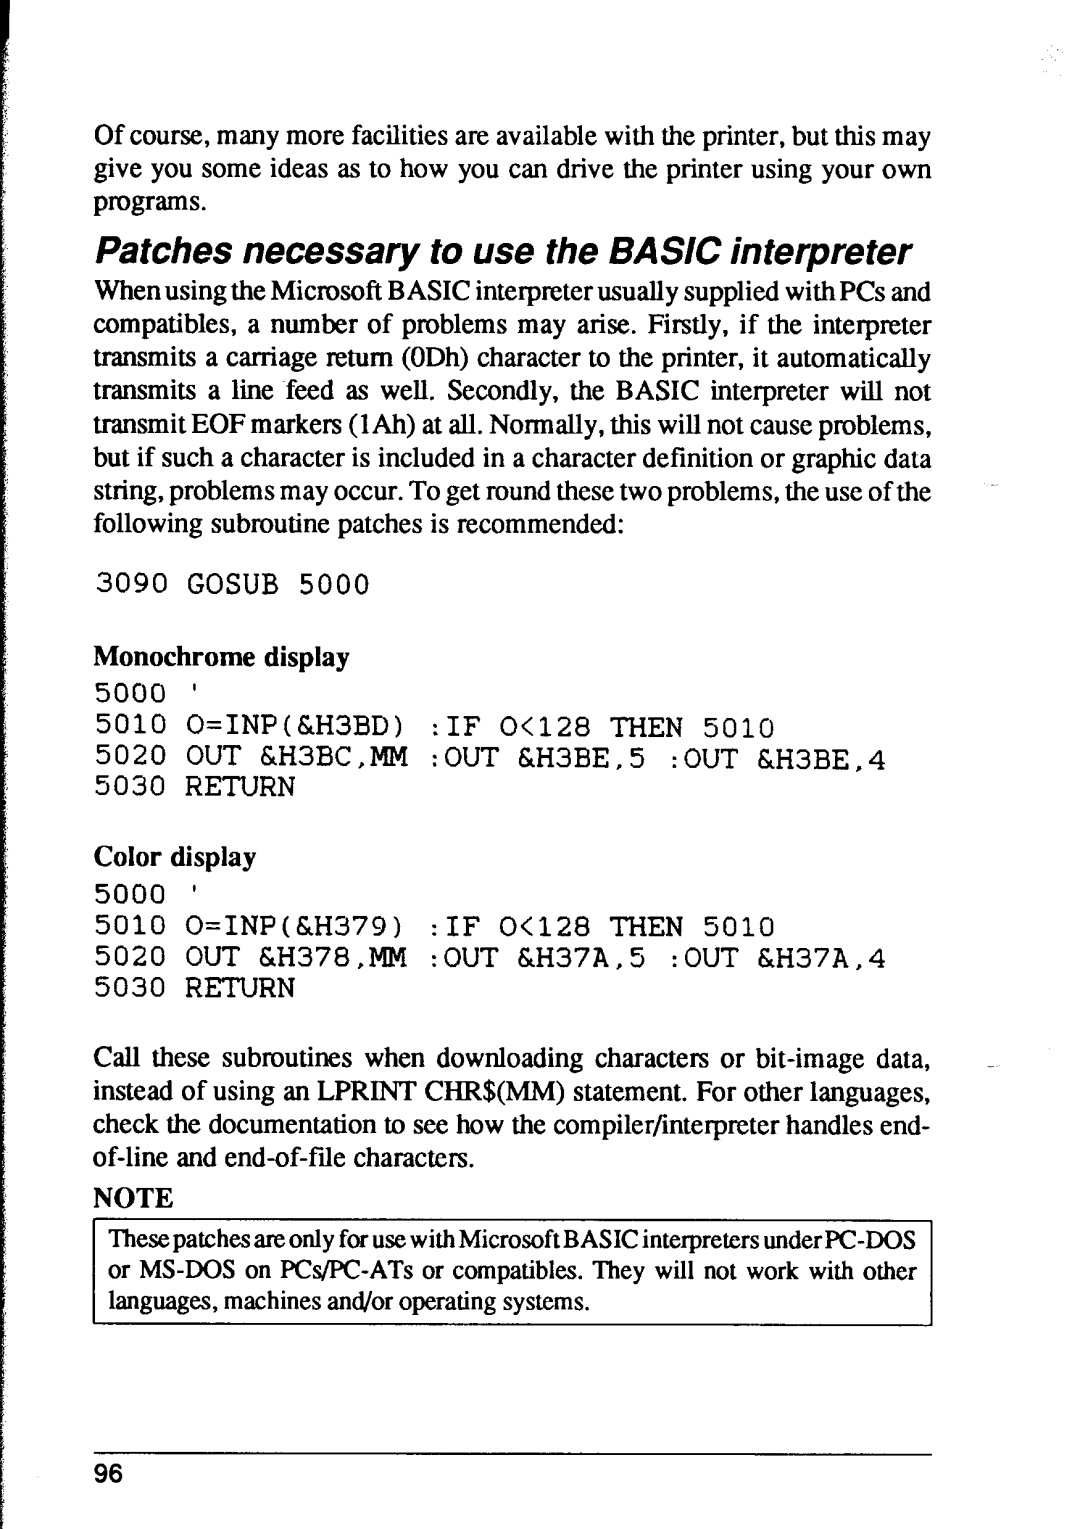 Star Micronics XR-1500, XR-1000 Patches necessary to use the BASIC interpreter, Monochrome display, Color display 